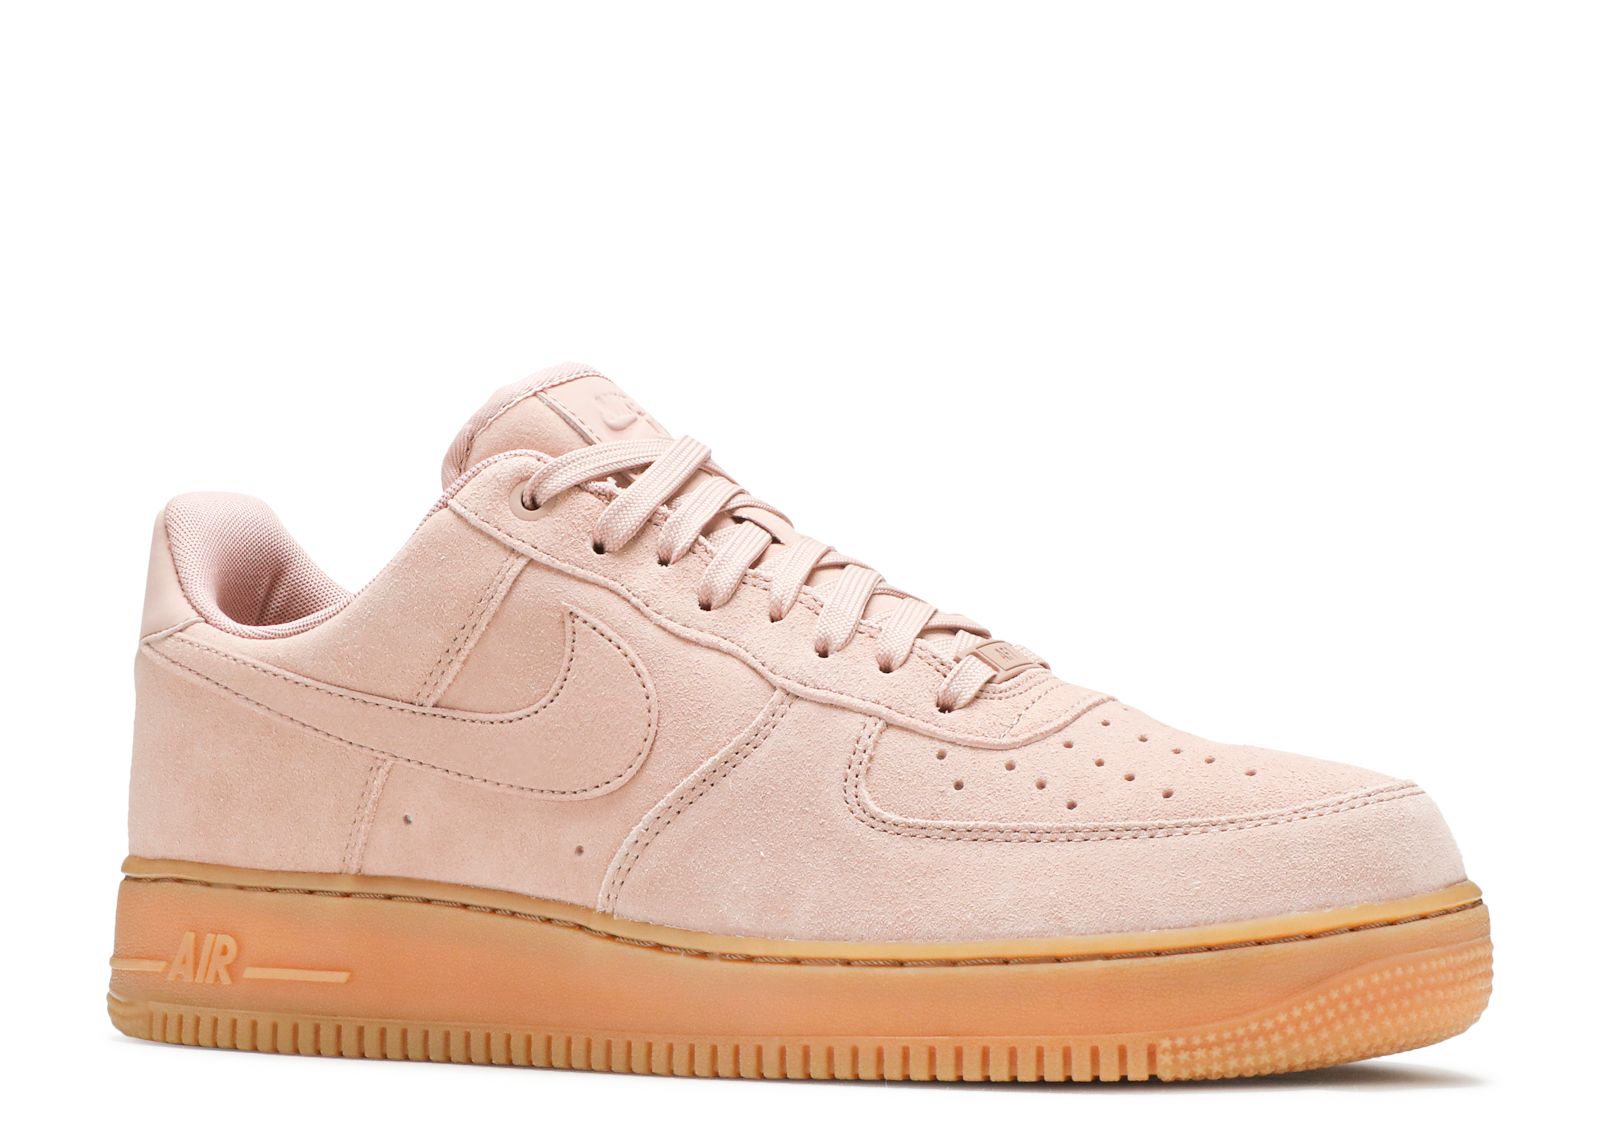 Air Force 1 Suede 'Particle Pink' - Nike - 600 - particle pink/gum medium brown-ivory-particle pink | Flight Club